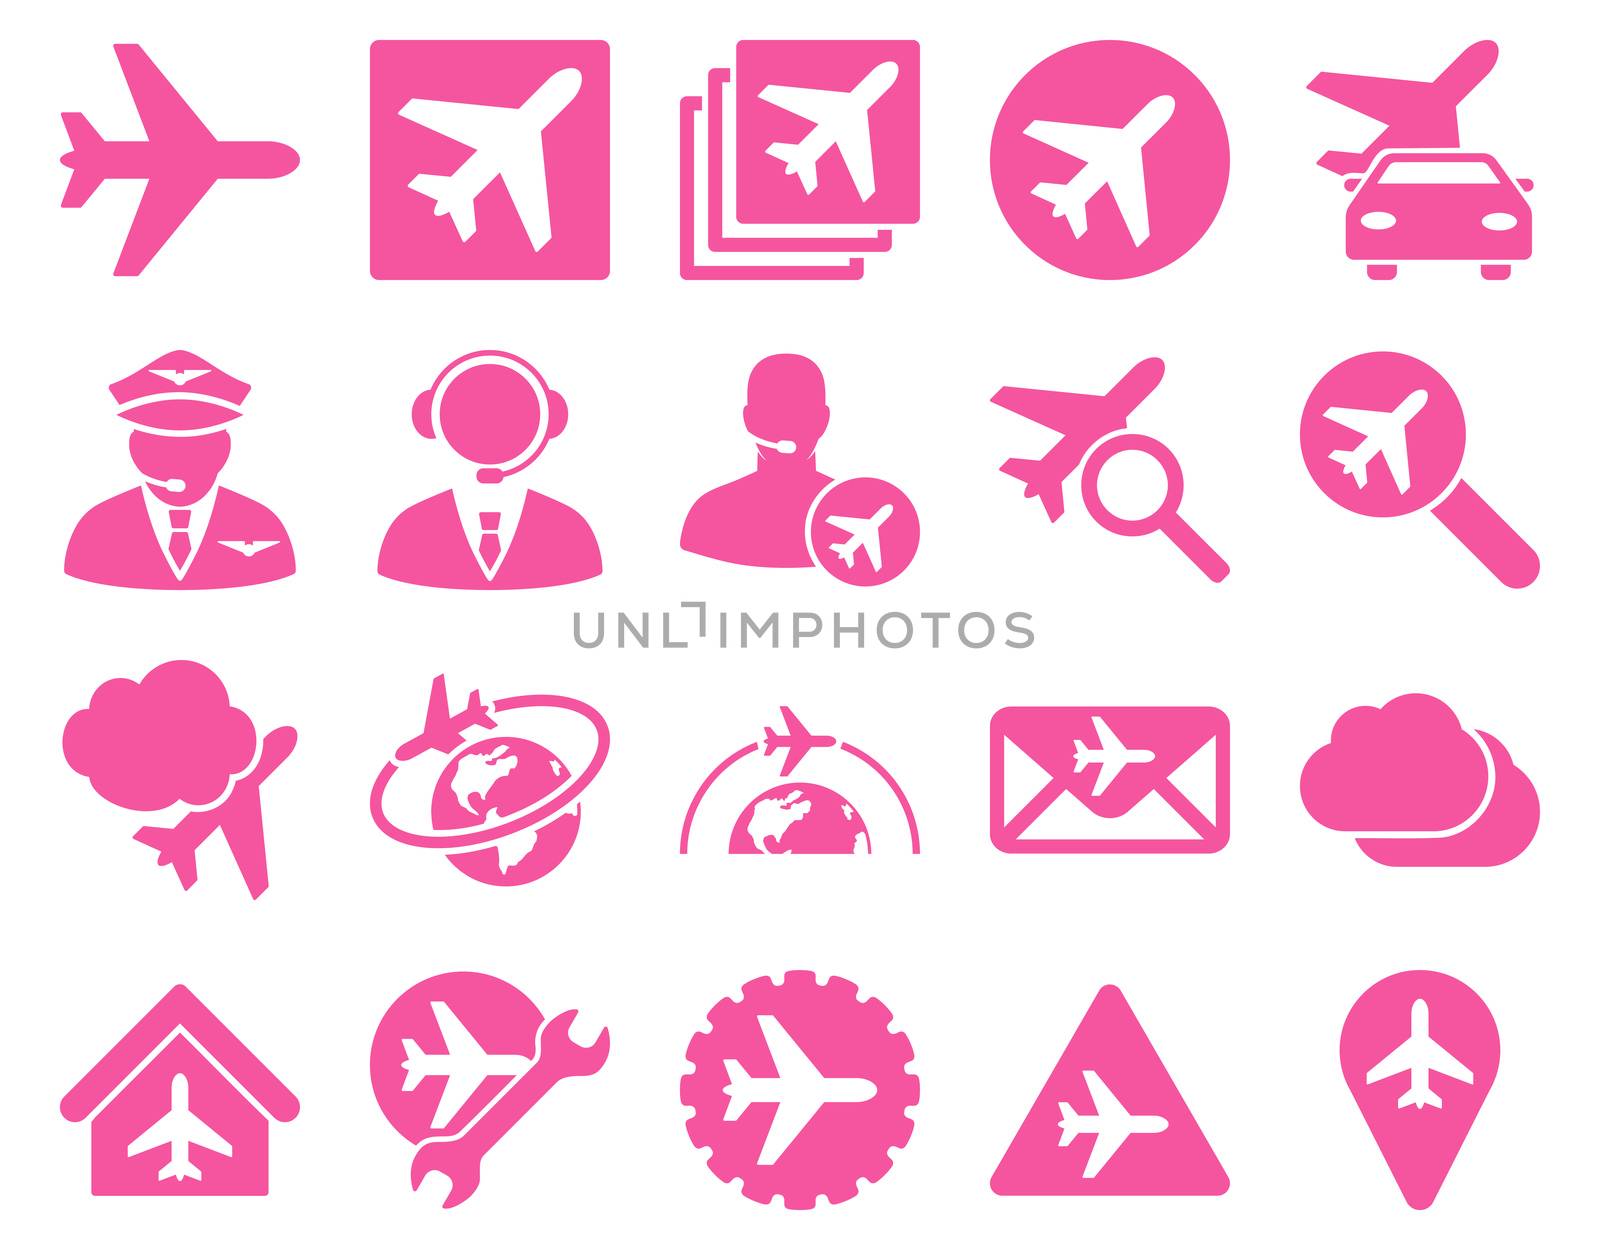 Aviation Icon Set. These flat icons use pink color. Raster images are isolated on a white background.